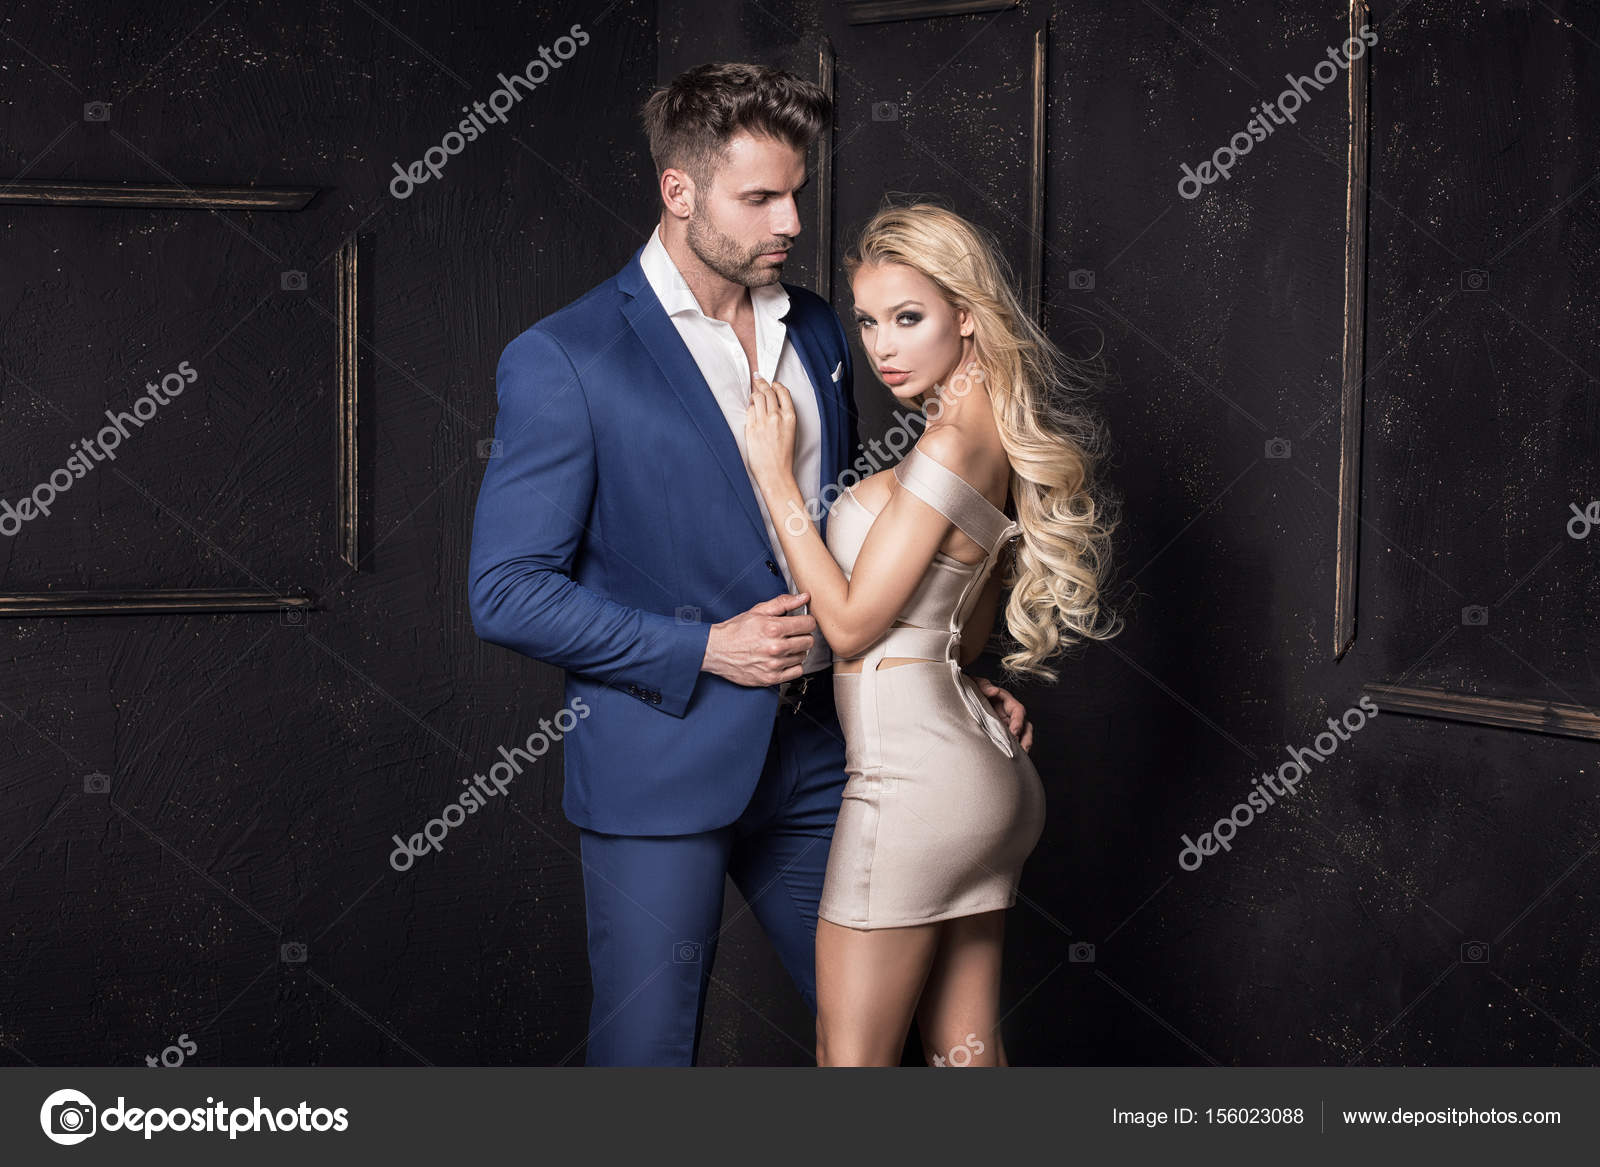 60+ Beautiful Couple Poses for Fantastic Looking Pictures